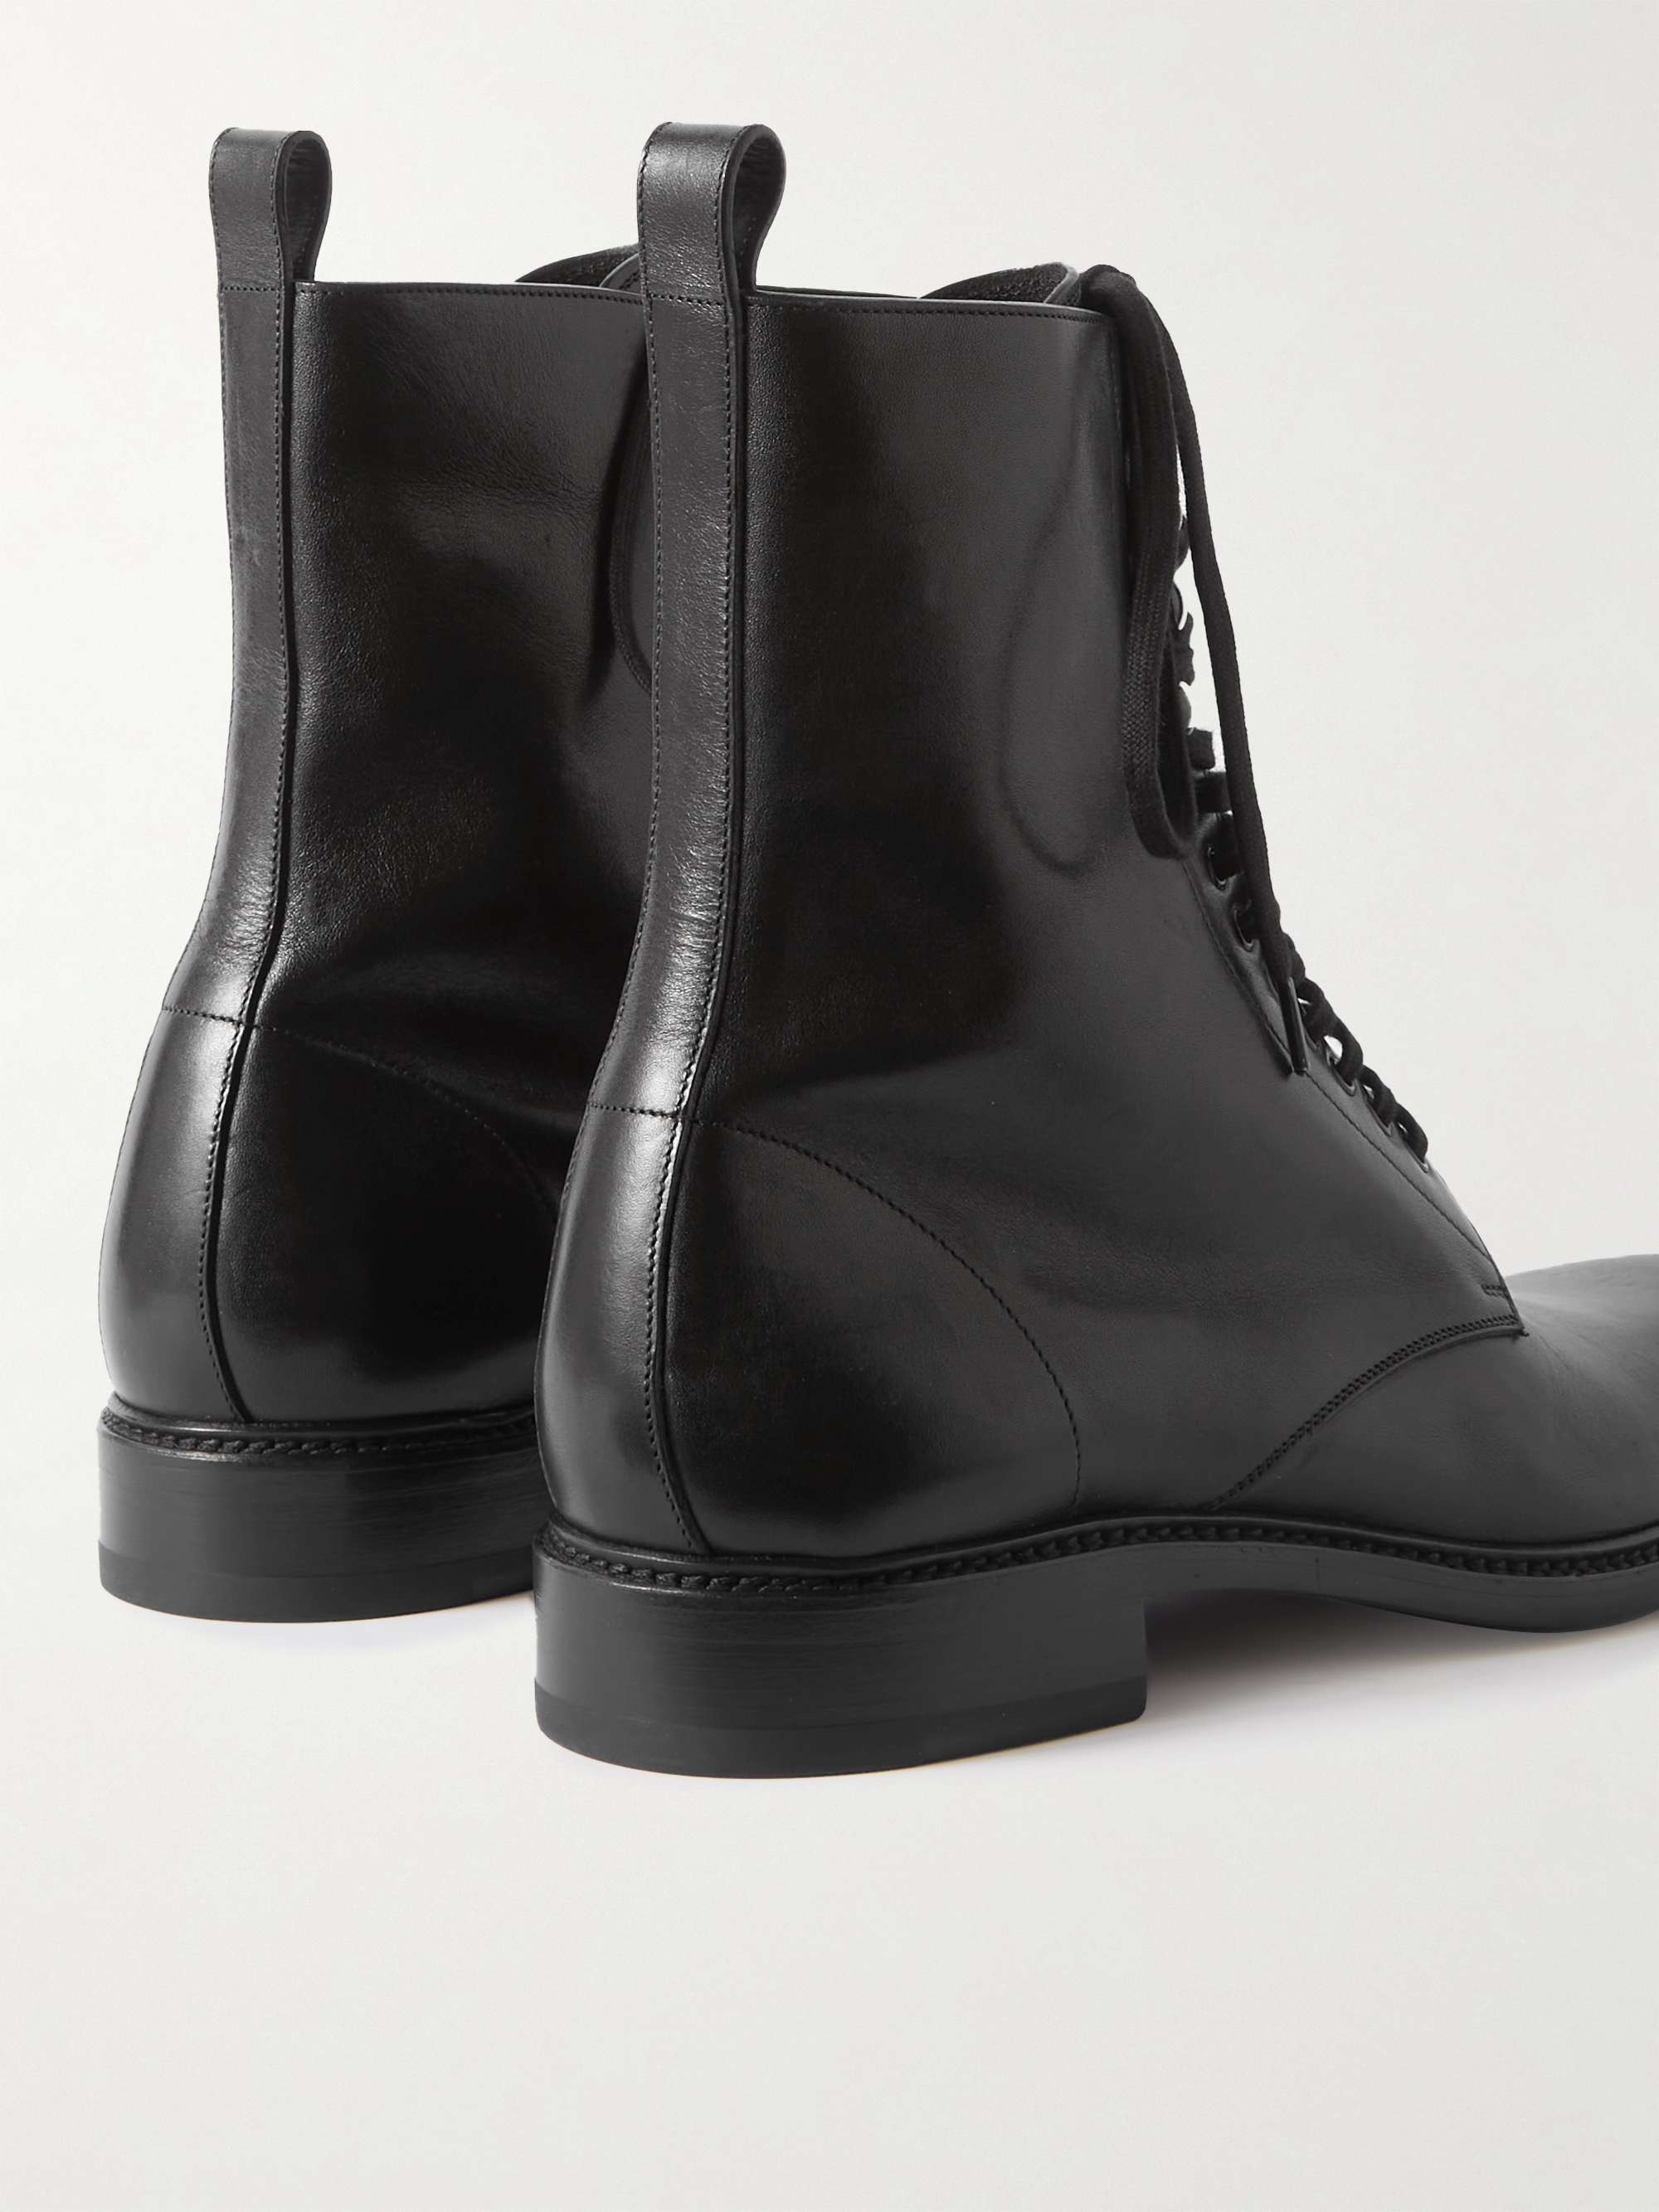 SAINT LAURENT Army Glossed-Leather Lace-Up Boots for Men | MR PORTER